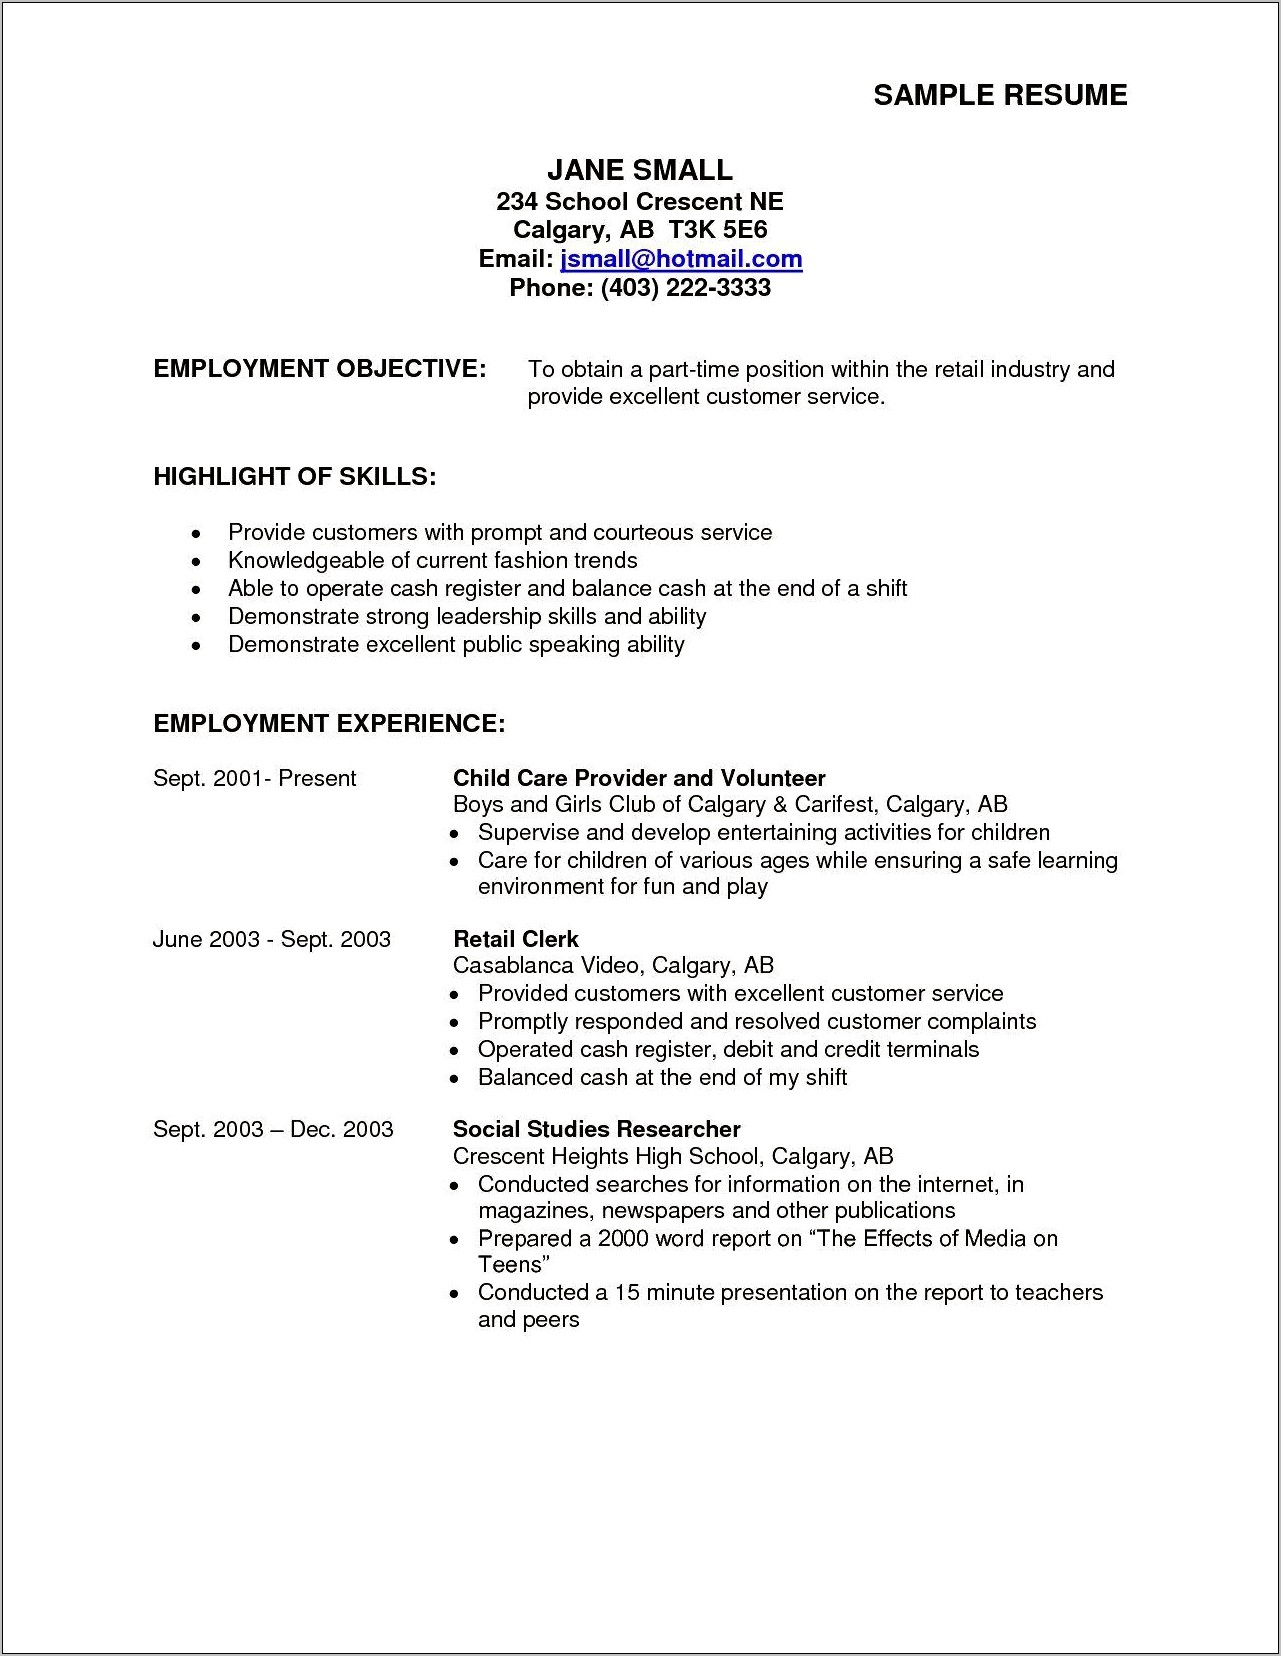 Resume Objective Seeking Part Time And Fulltime